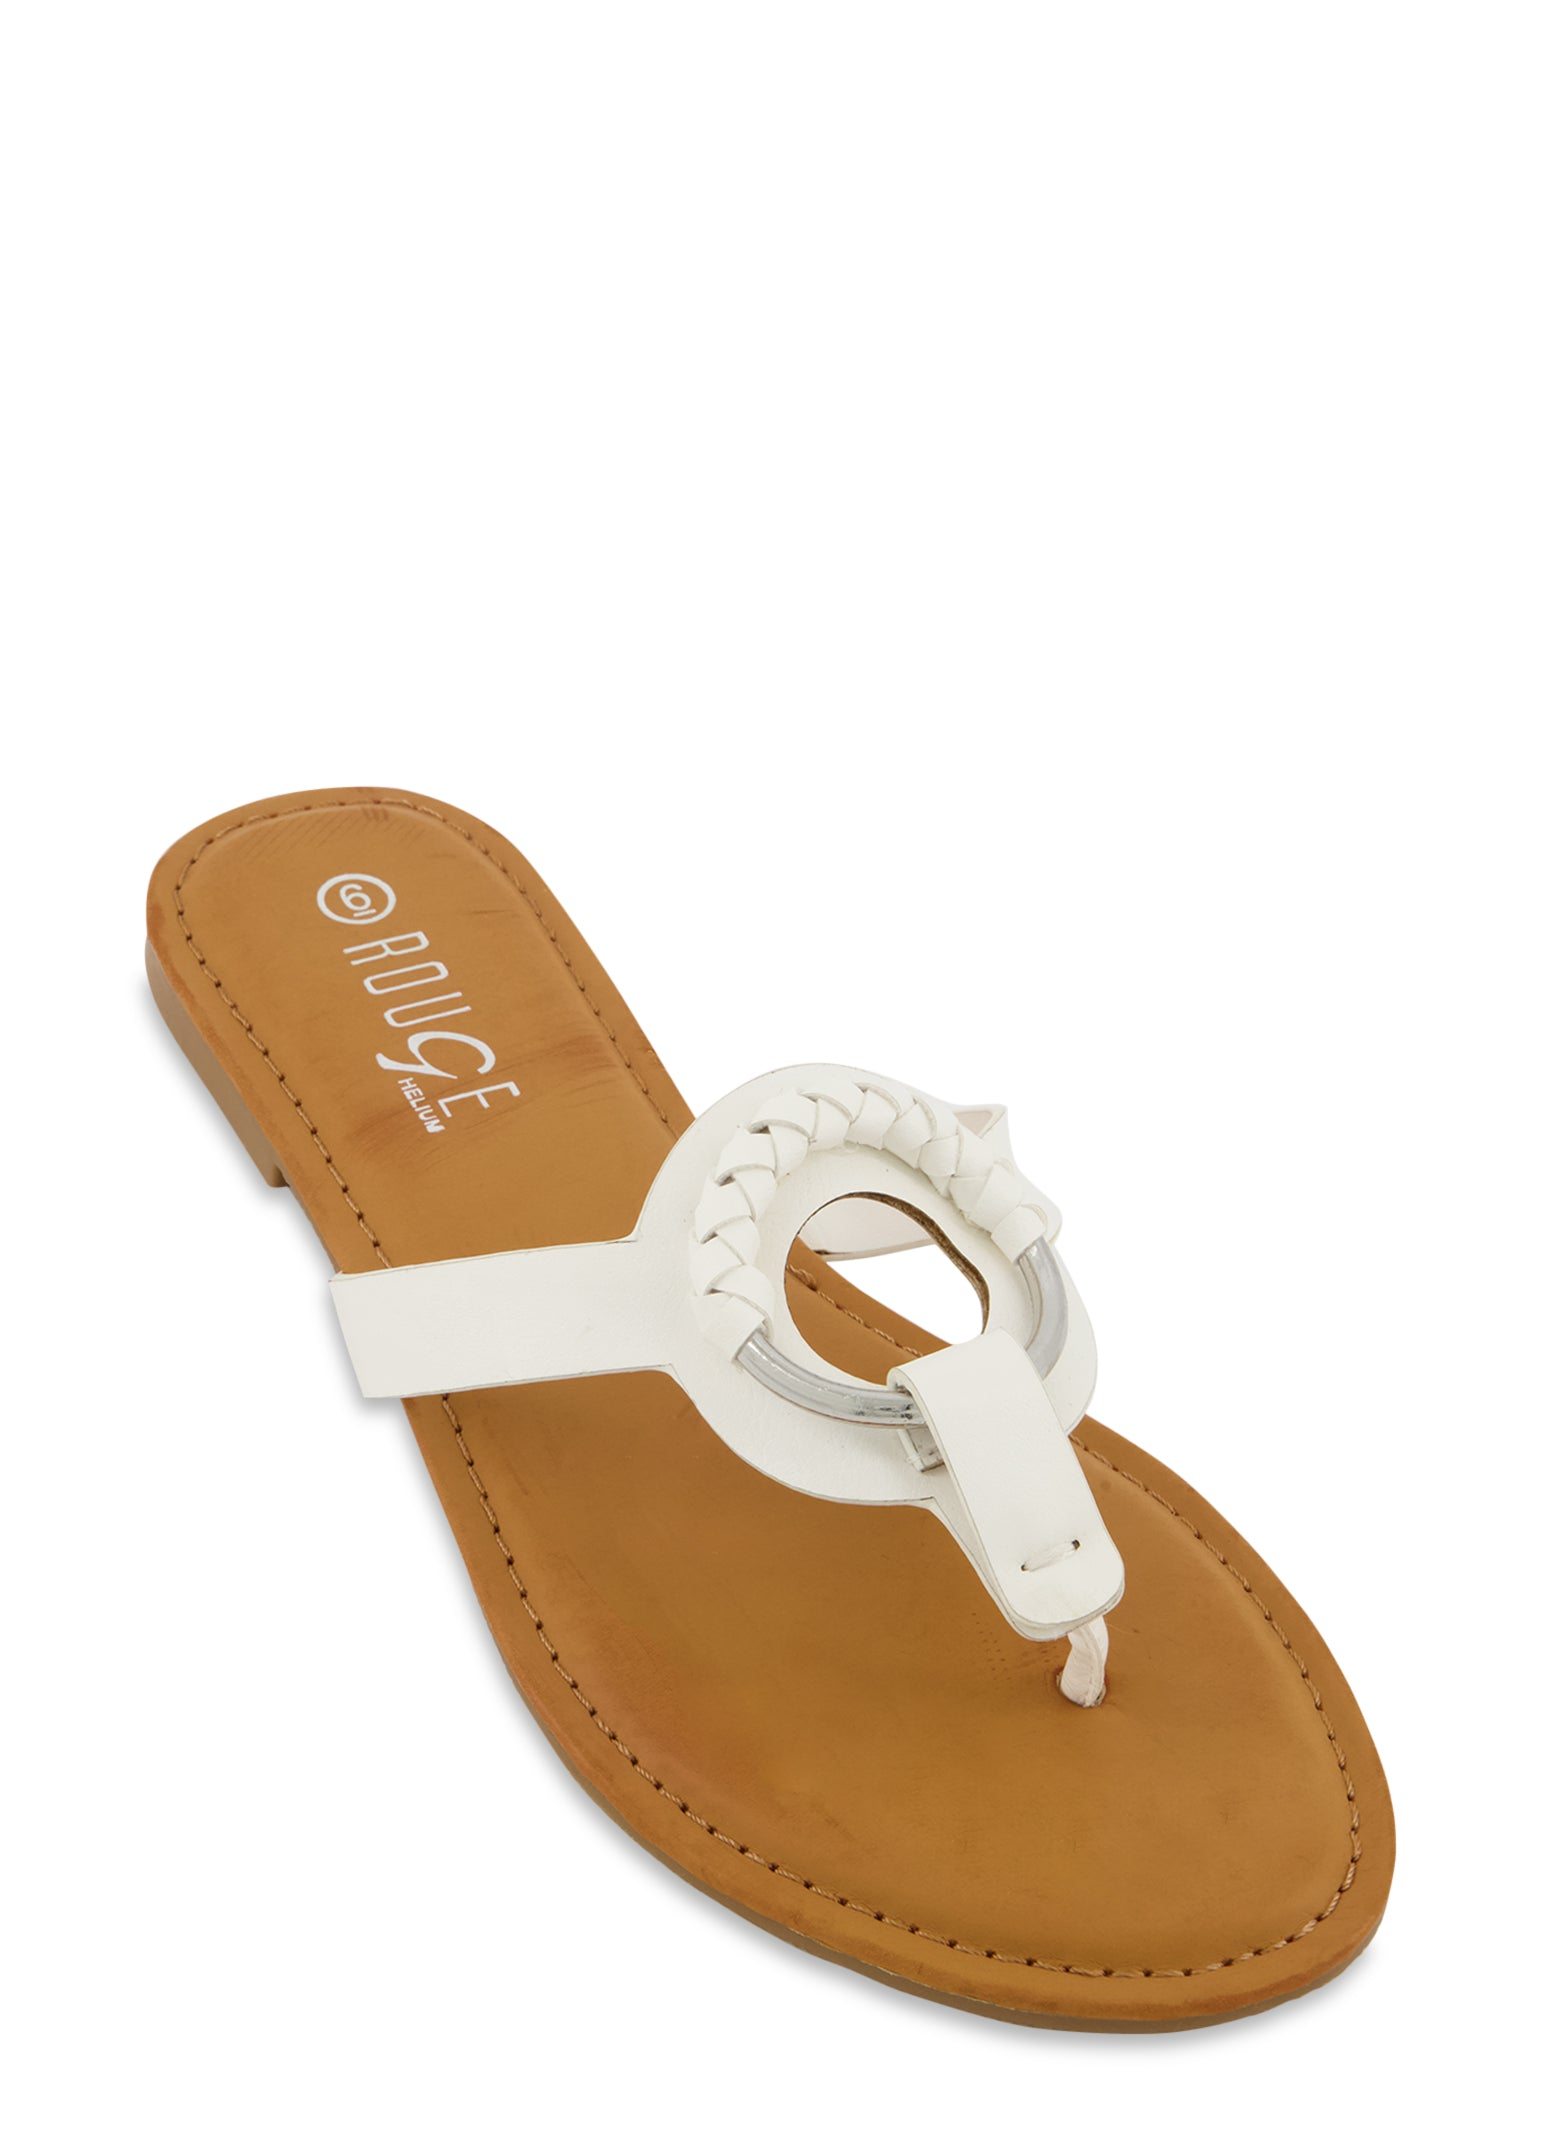 Woven Ring Thong Sandals